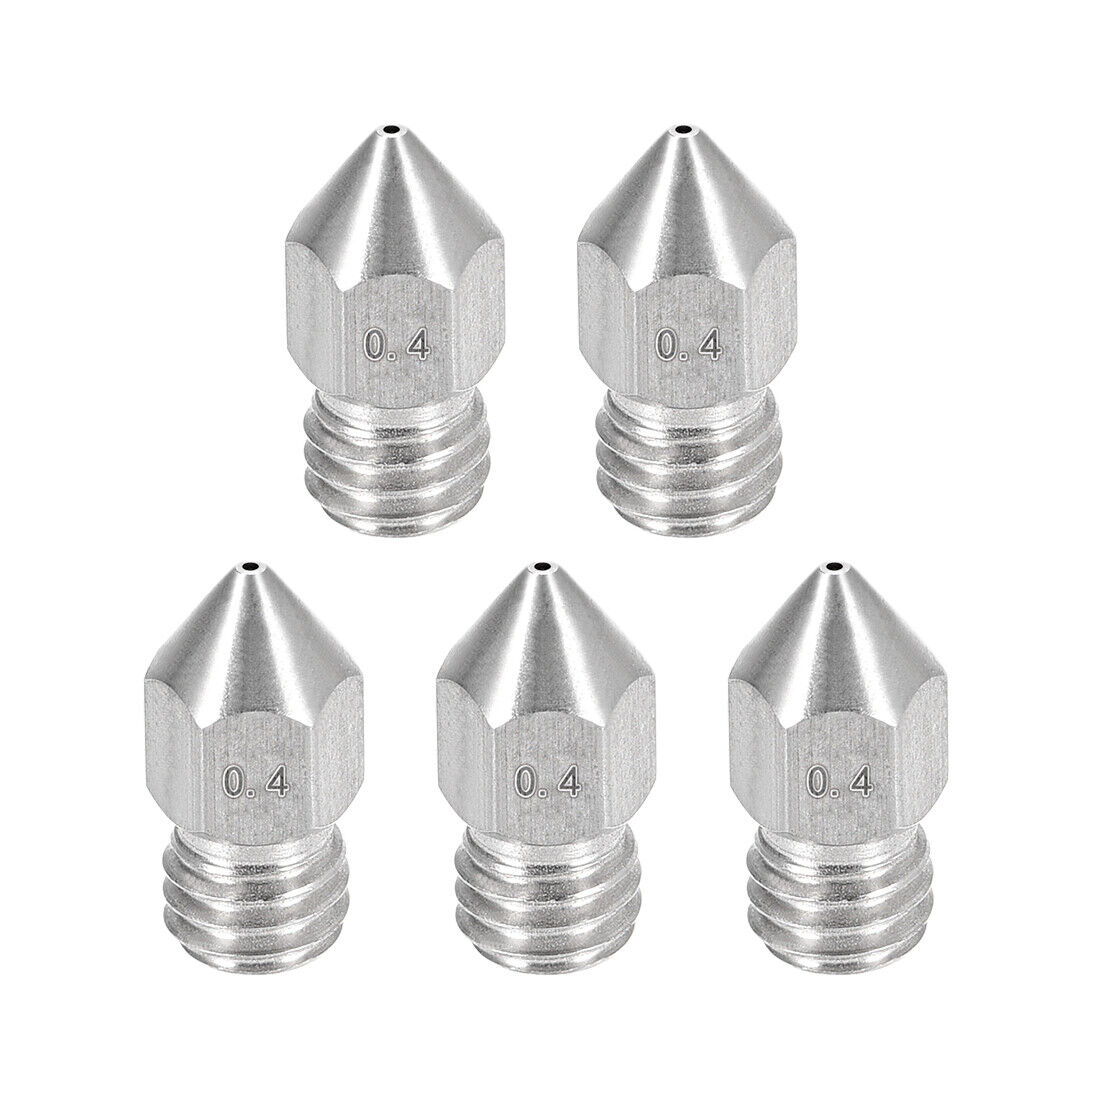 5pcs 0.4mm 3D Printer Nozzle Fit for MK8 1.75mm Filament Stainless Steel